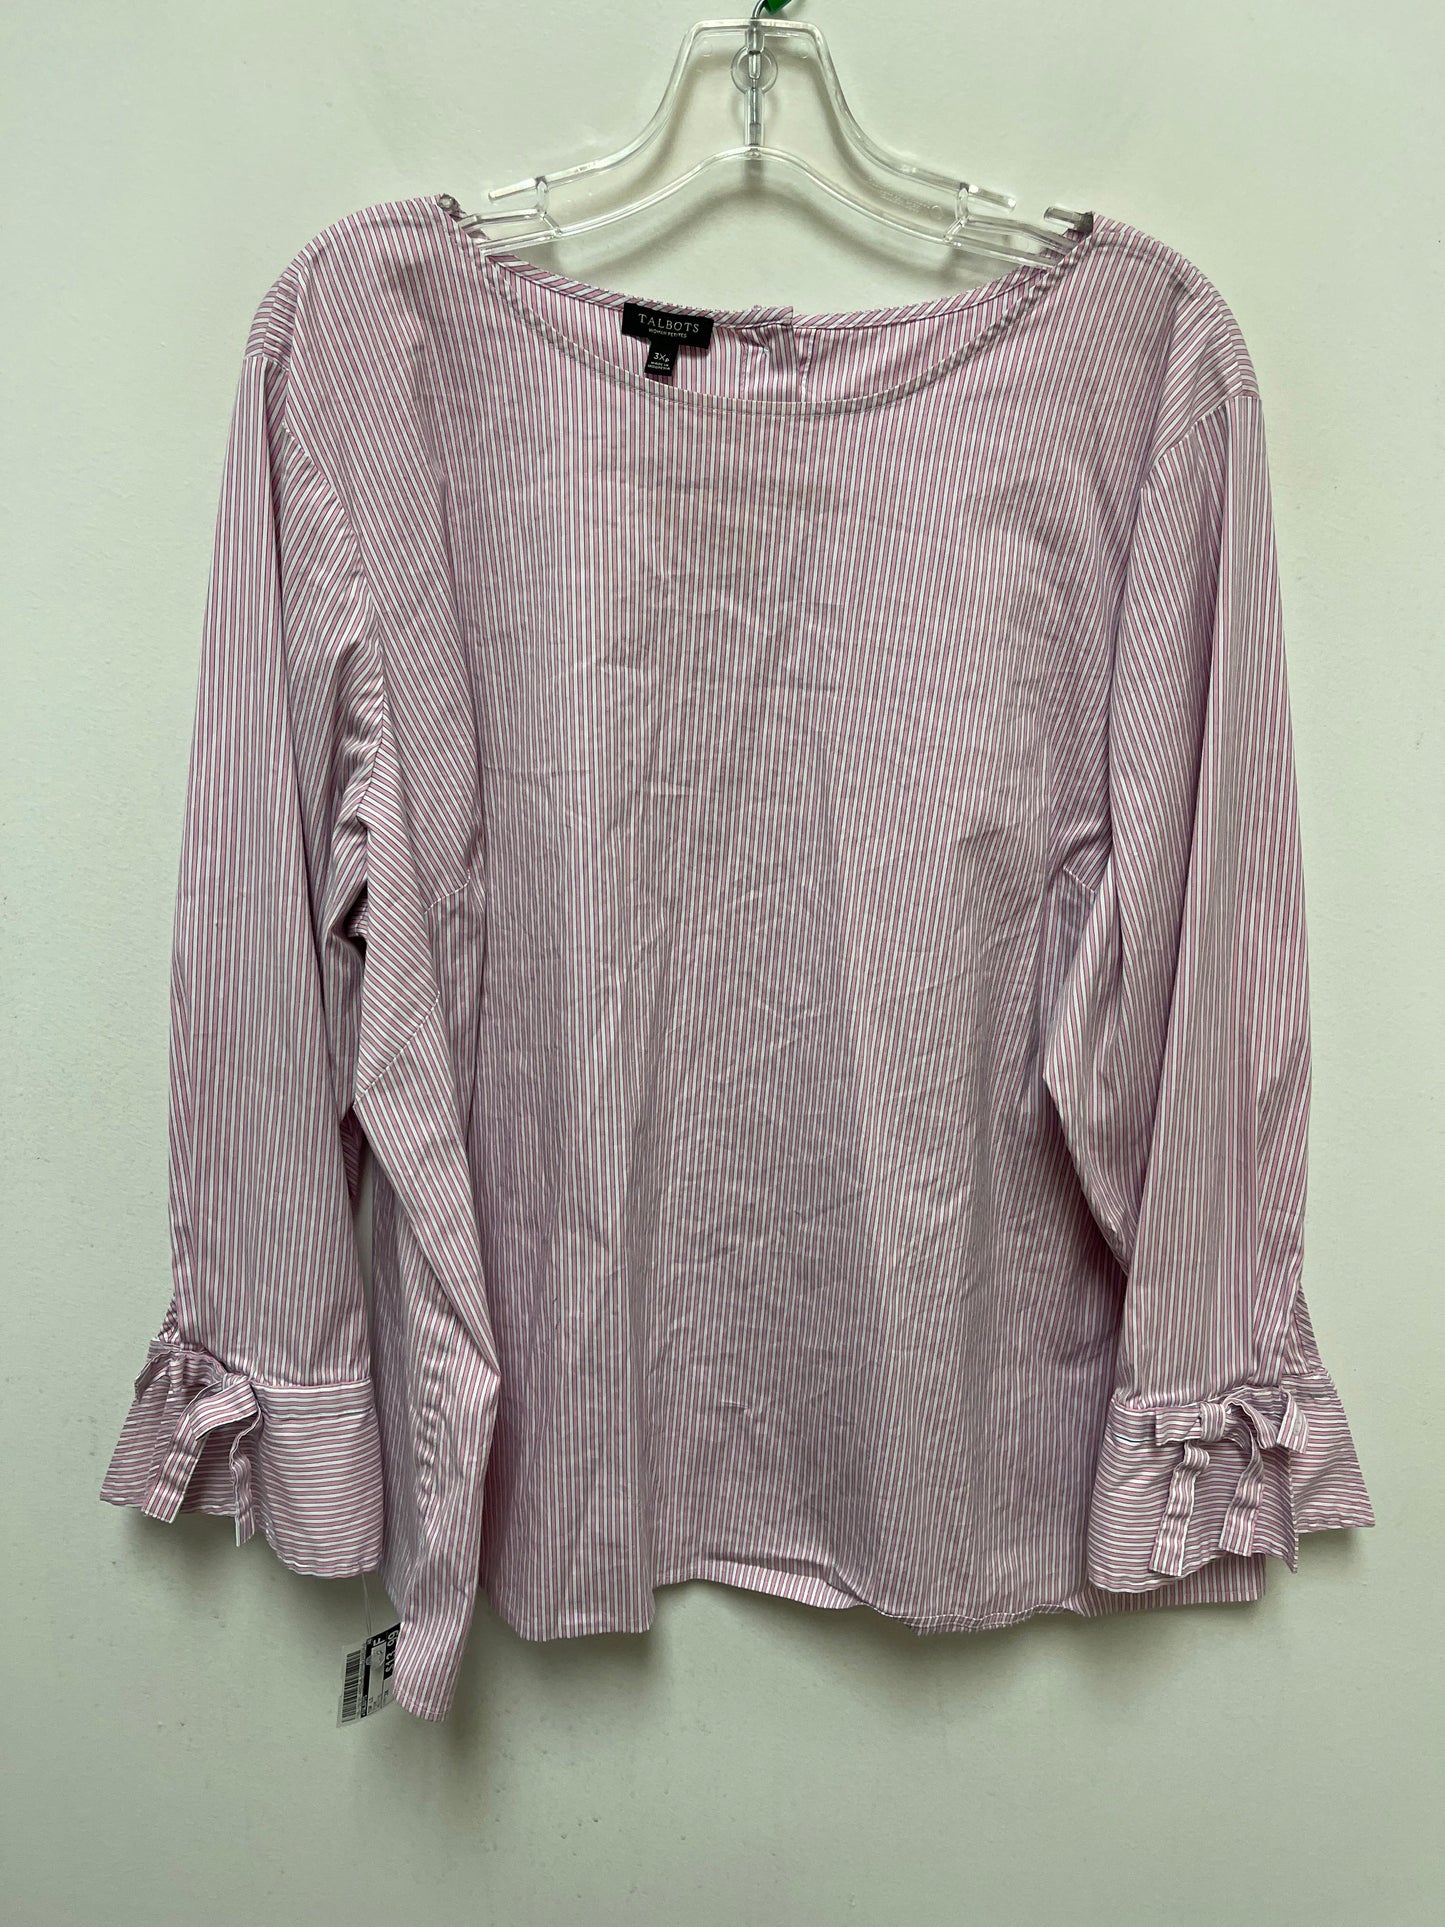 Pink Top Long Sleeve Talbots, Size 3x